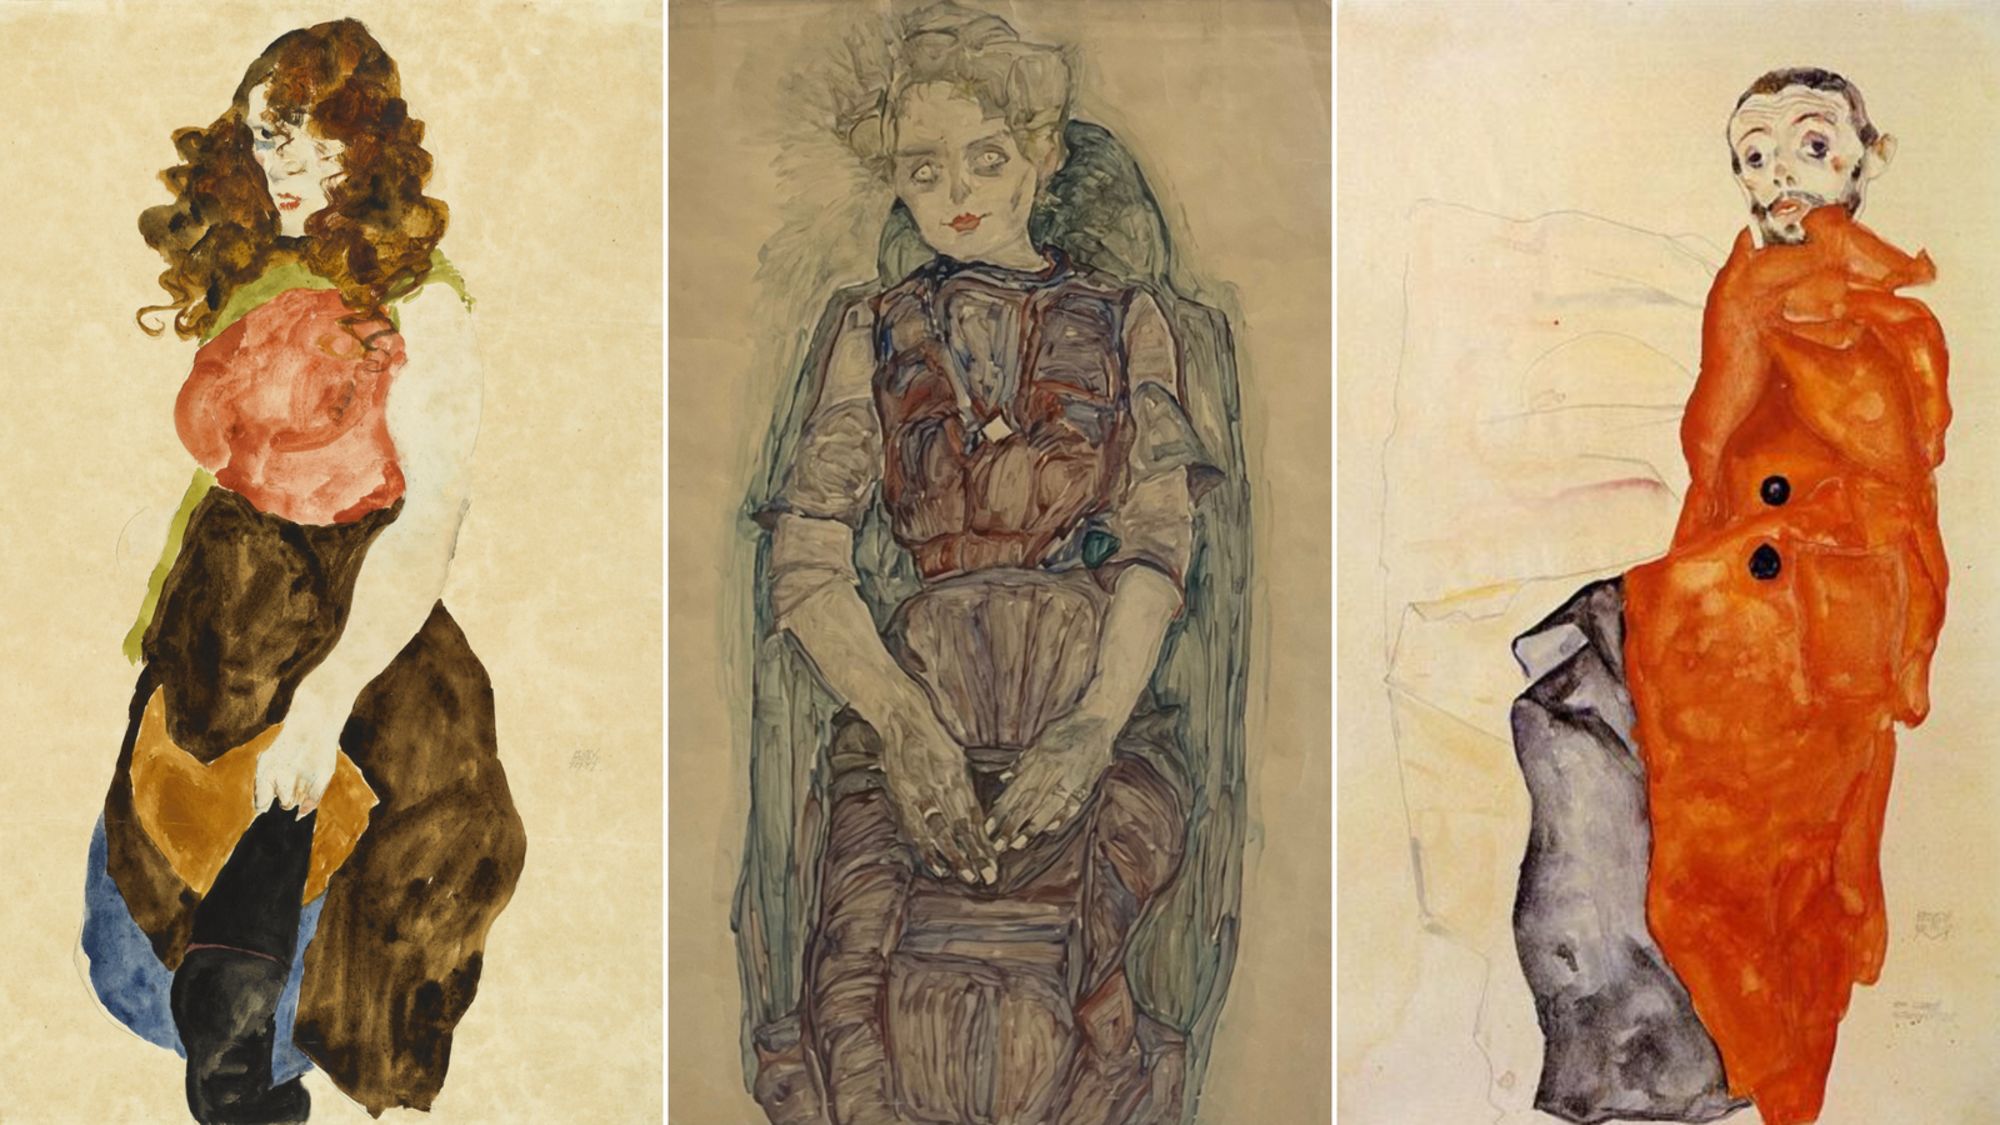 These drawings by Egon Schiele were recently returned to the heirs of their former owner, Fritz Grünbaum, whose art collection was stolen by the Nazis during World War II.